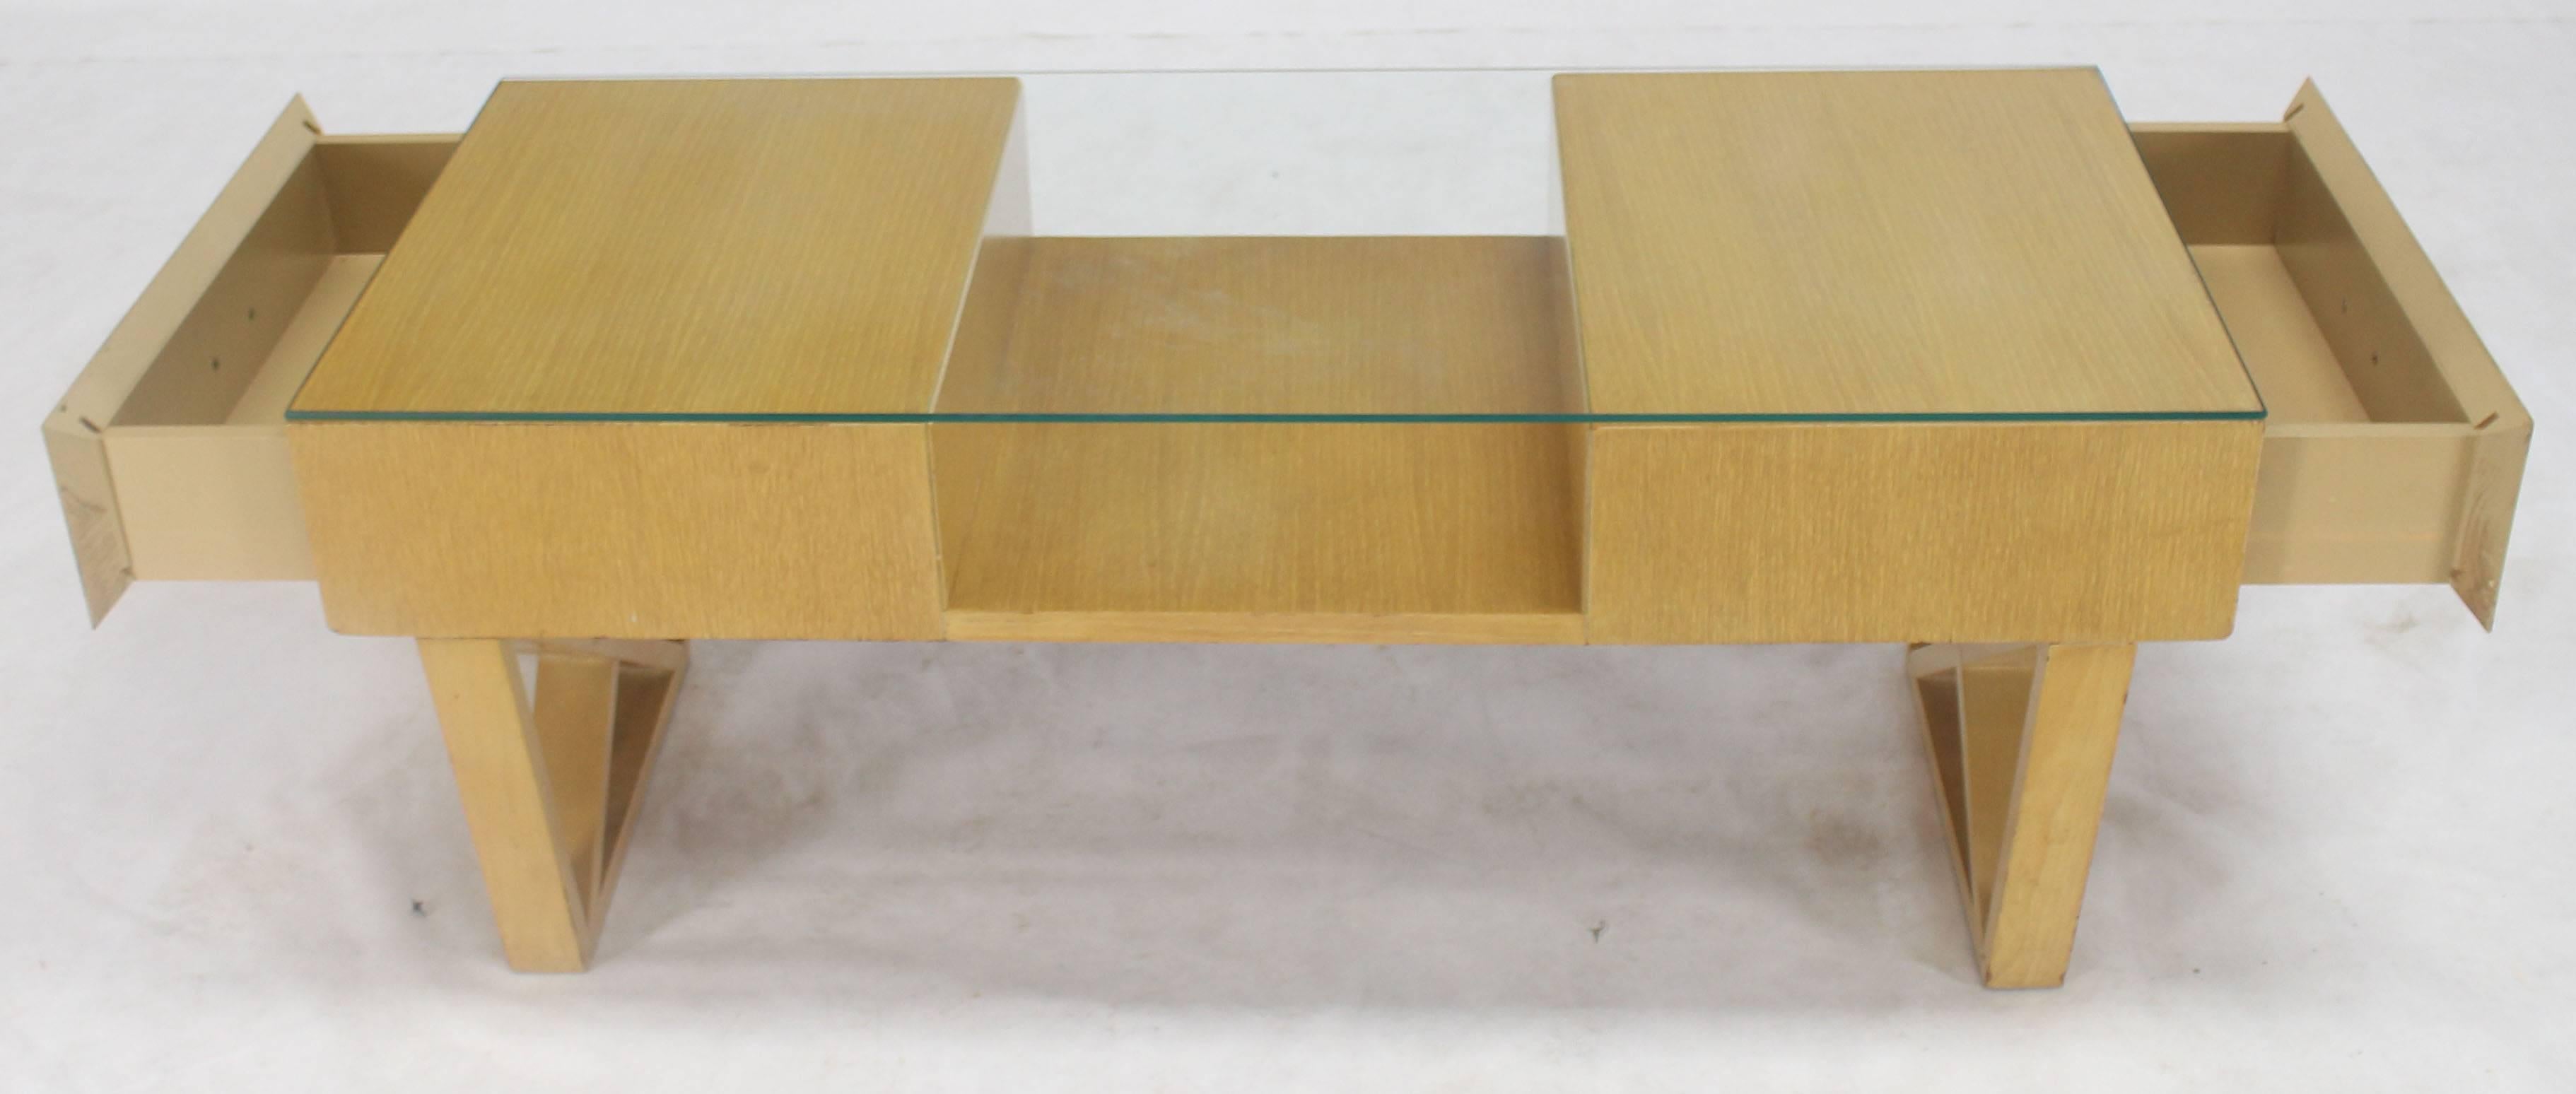 20th Century Blond Cerused Oak Glass Top X-Base Rectangular Coffee Table Storage Drawers For Sale